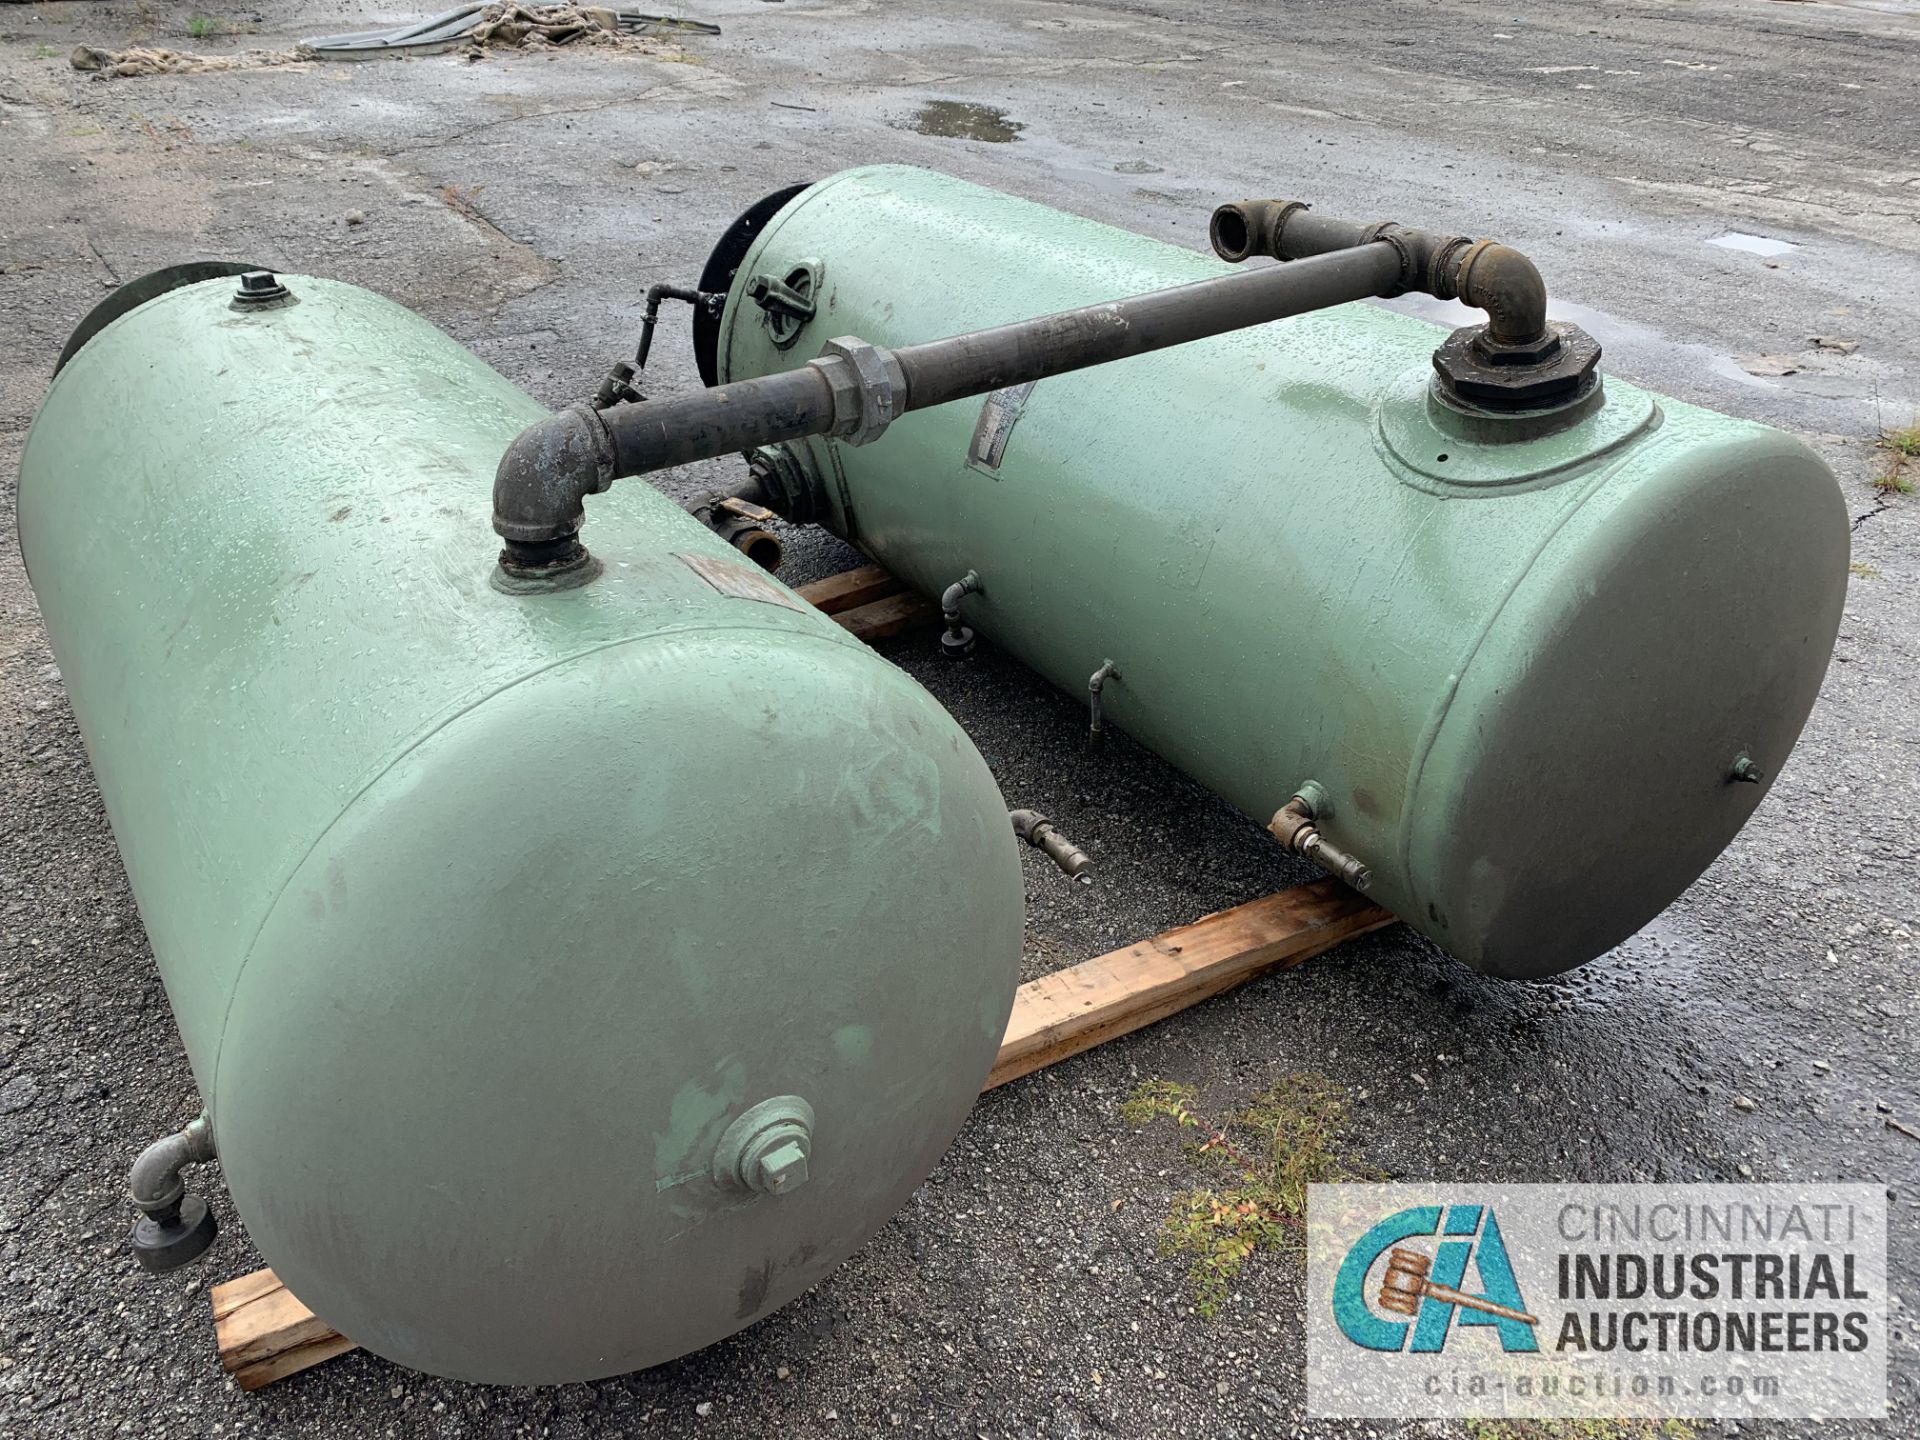 CHICAGO STEEL AIR TANK - $20.00 Rigging Fee Due to Onsite Rigger - Located in Holland, Ohio